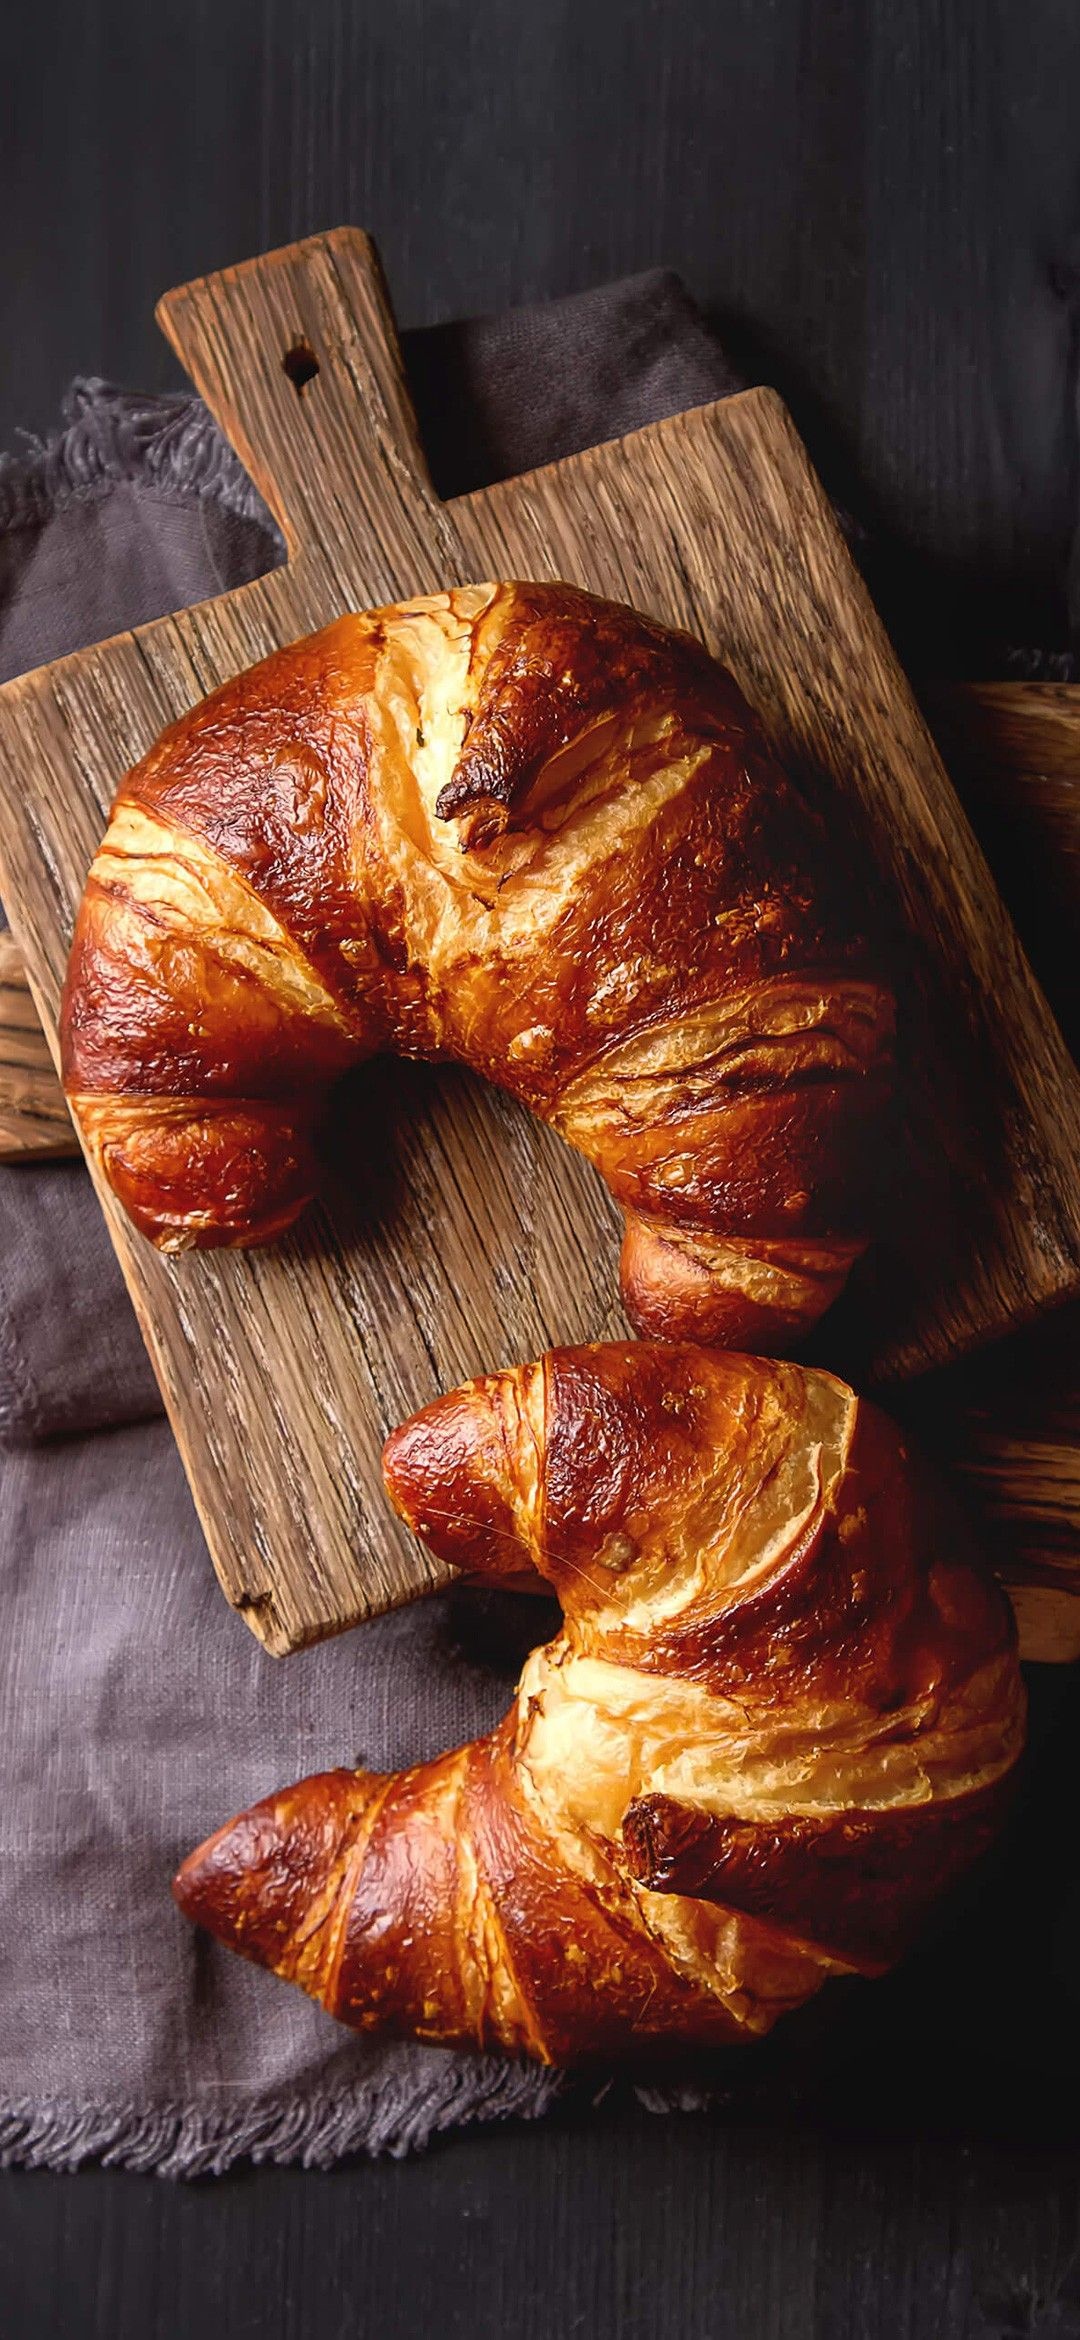 Croissant: Must be made with pure butter, not margarine or other fats. 1080x2340 HD Background.